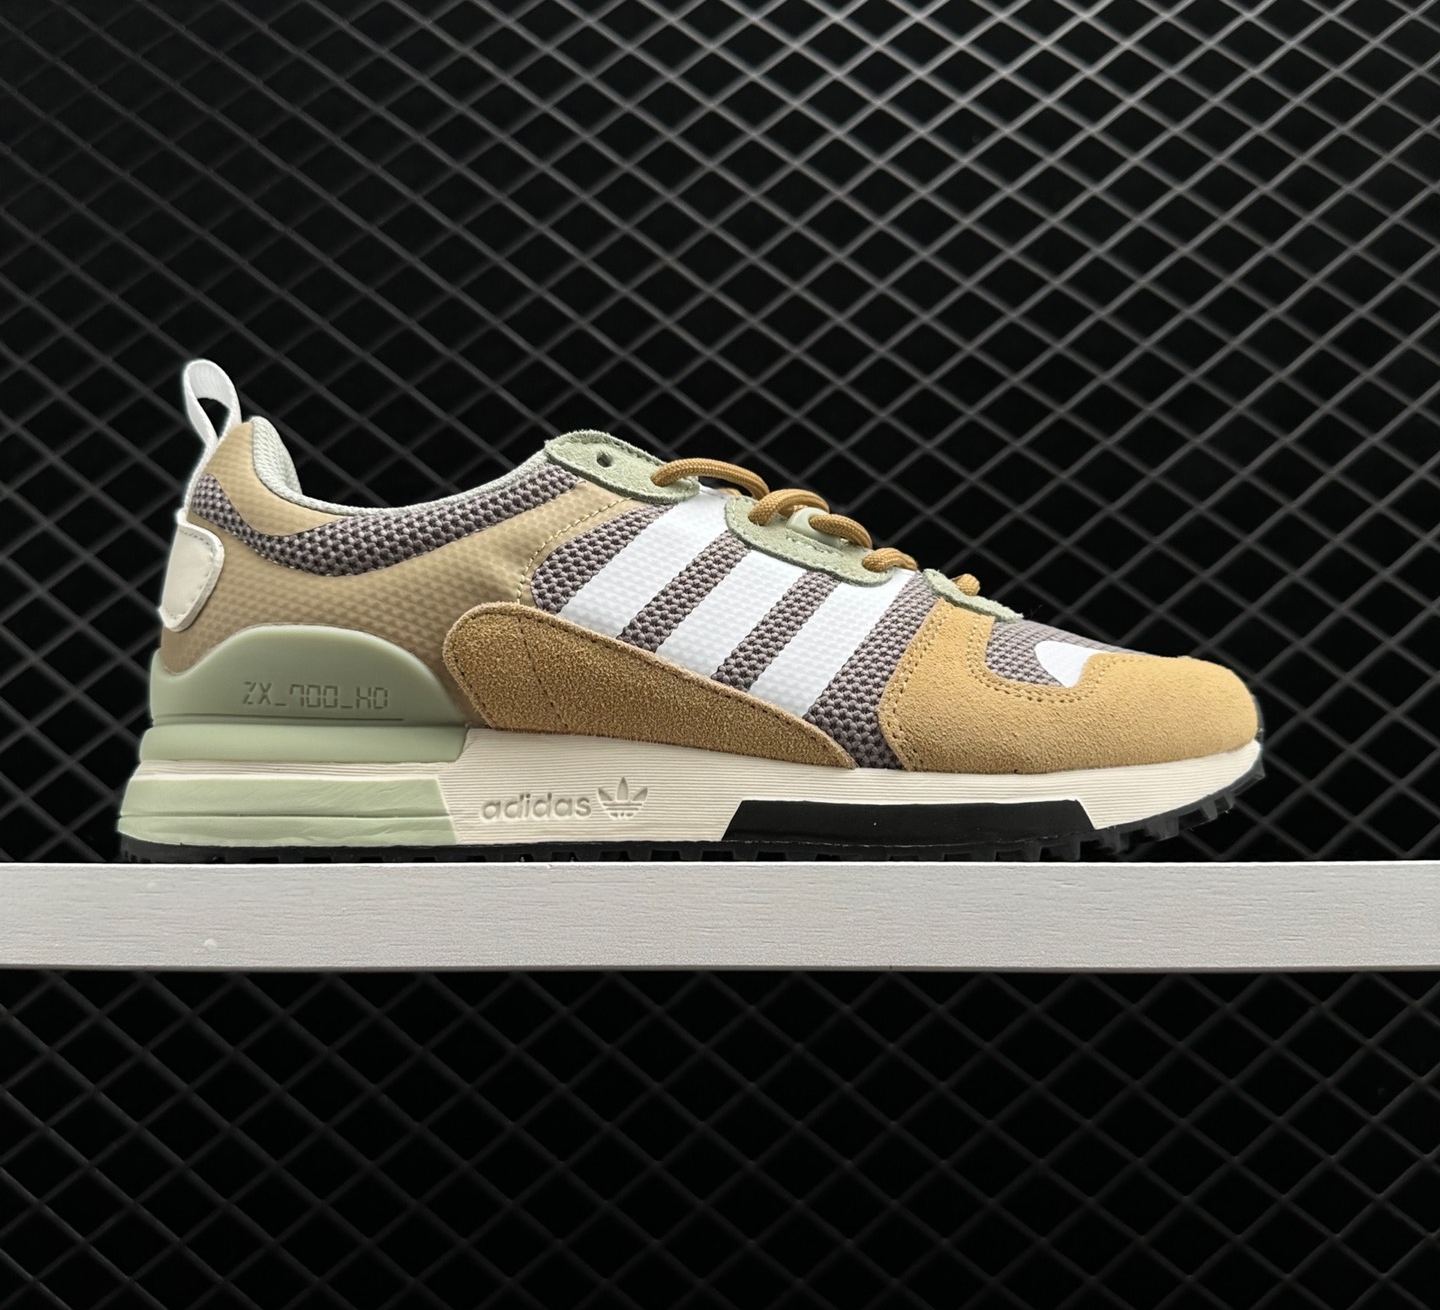 Adidas Originals ZX 700 HD SHOES Beige-Off White-Feather Grey (H01849)